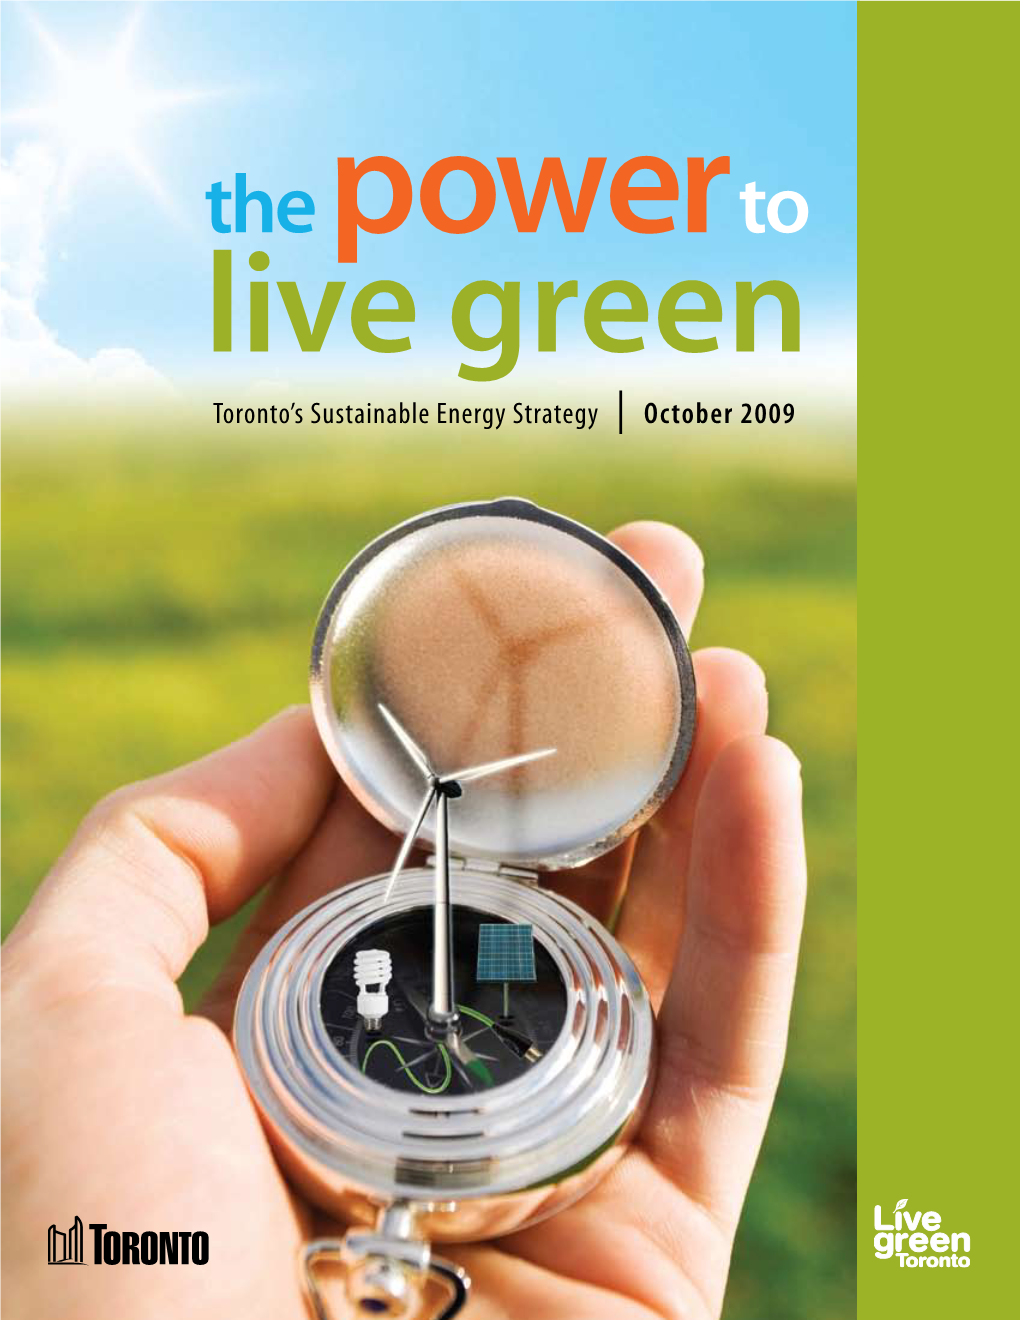 The Power to Live Green: Sustainable Energy Strategy